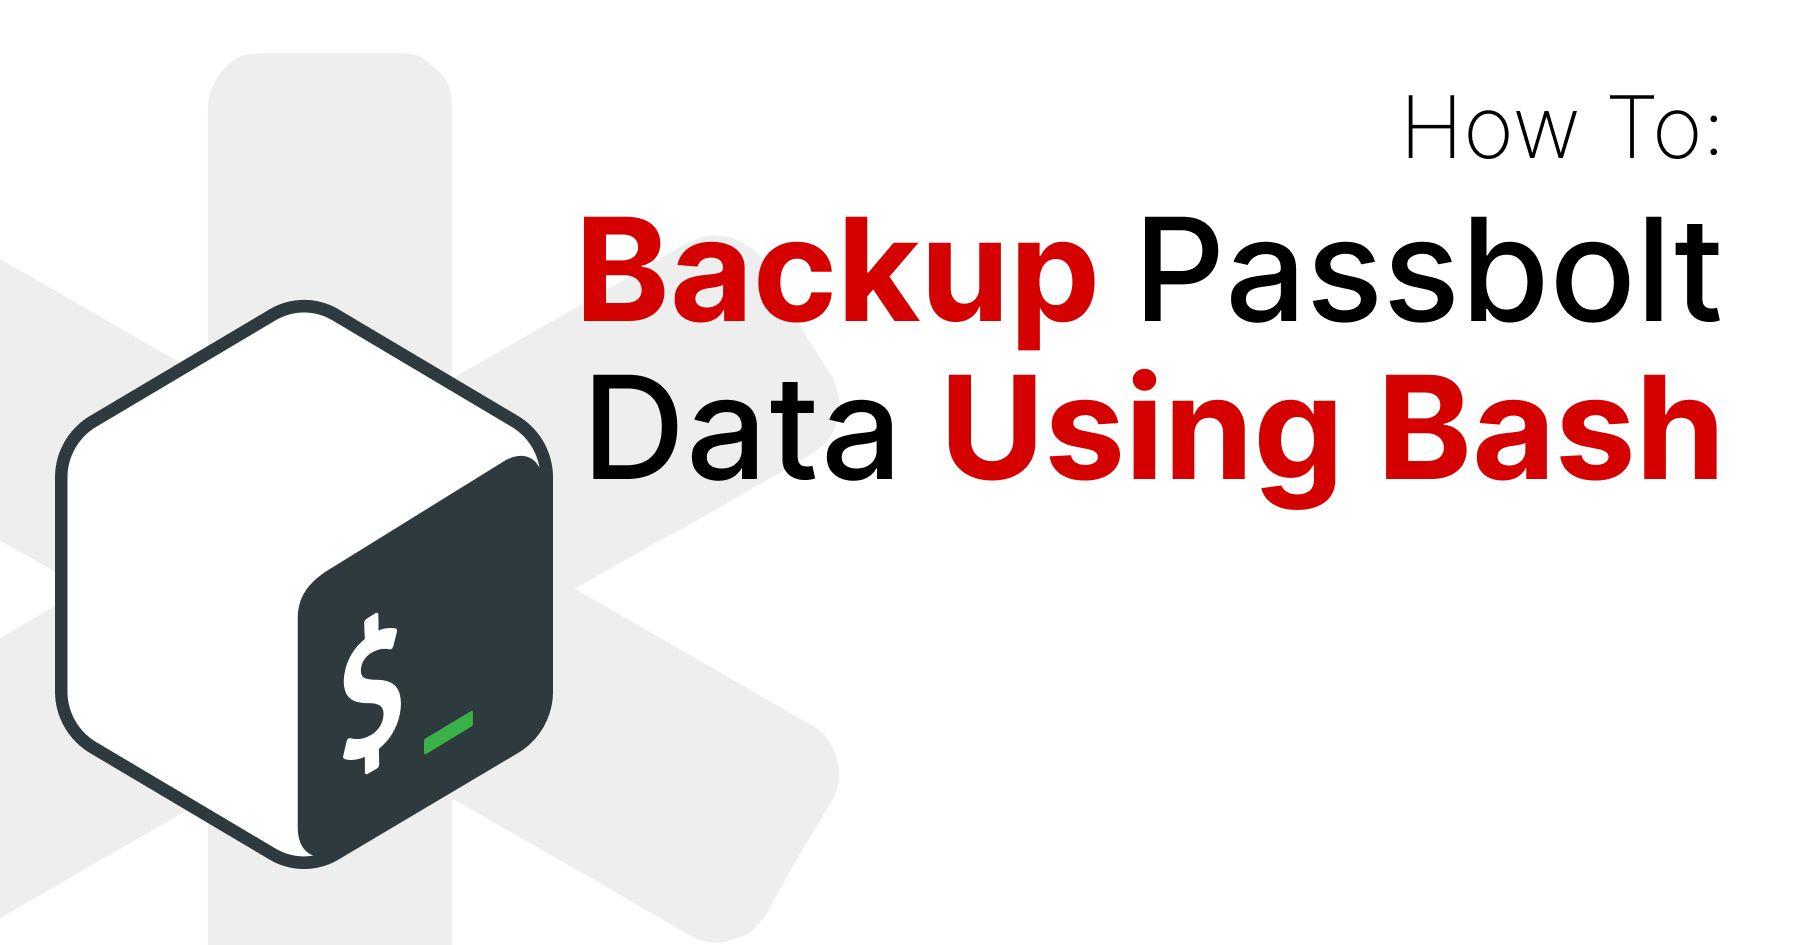 Create A Backup of Passbolt Data With A Bash Script